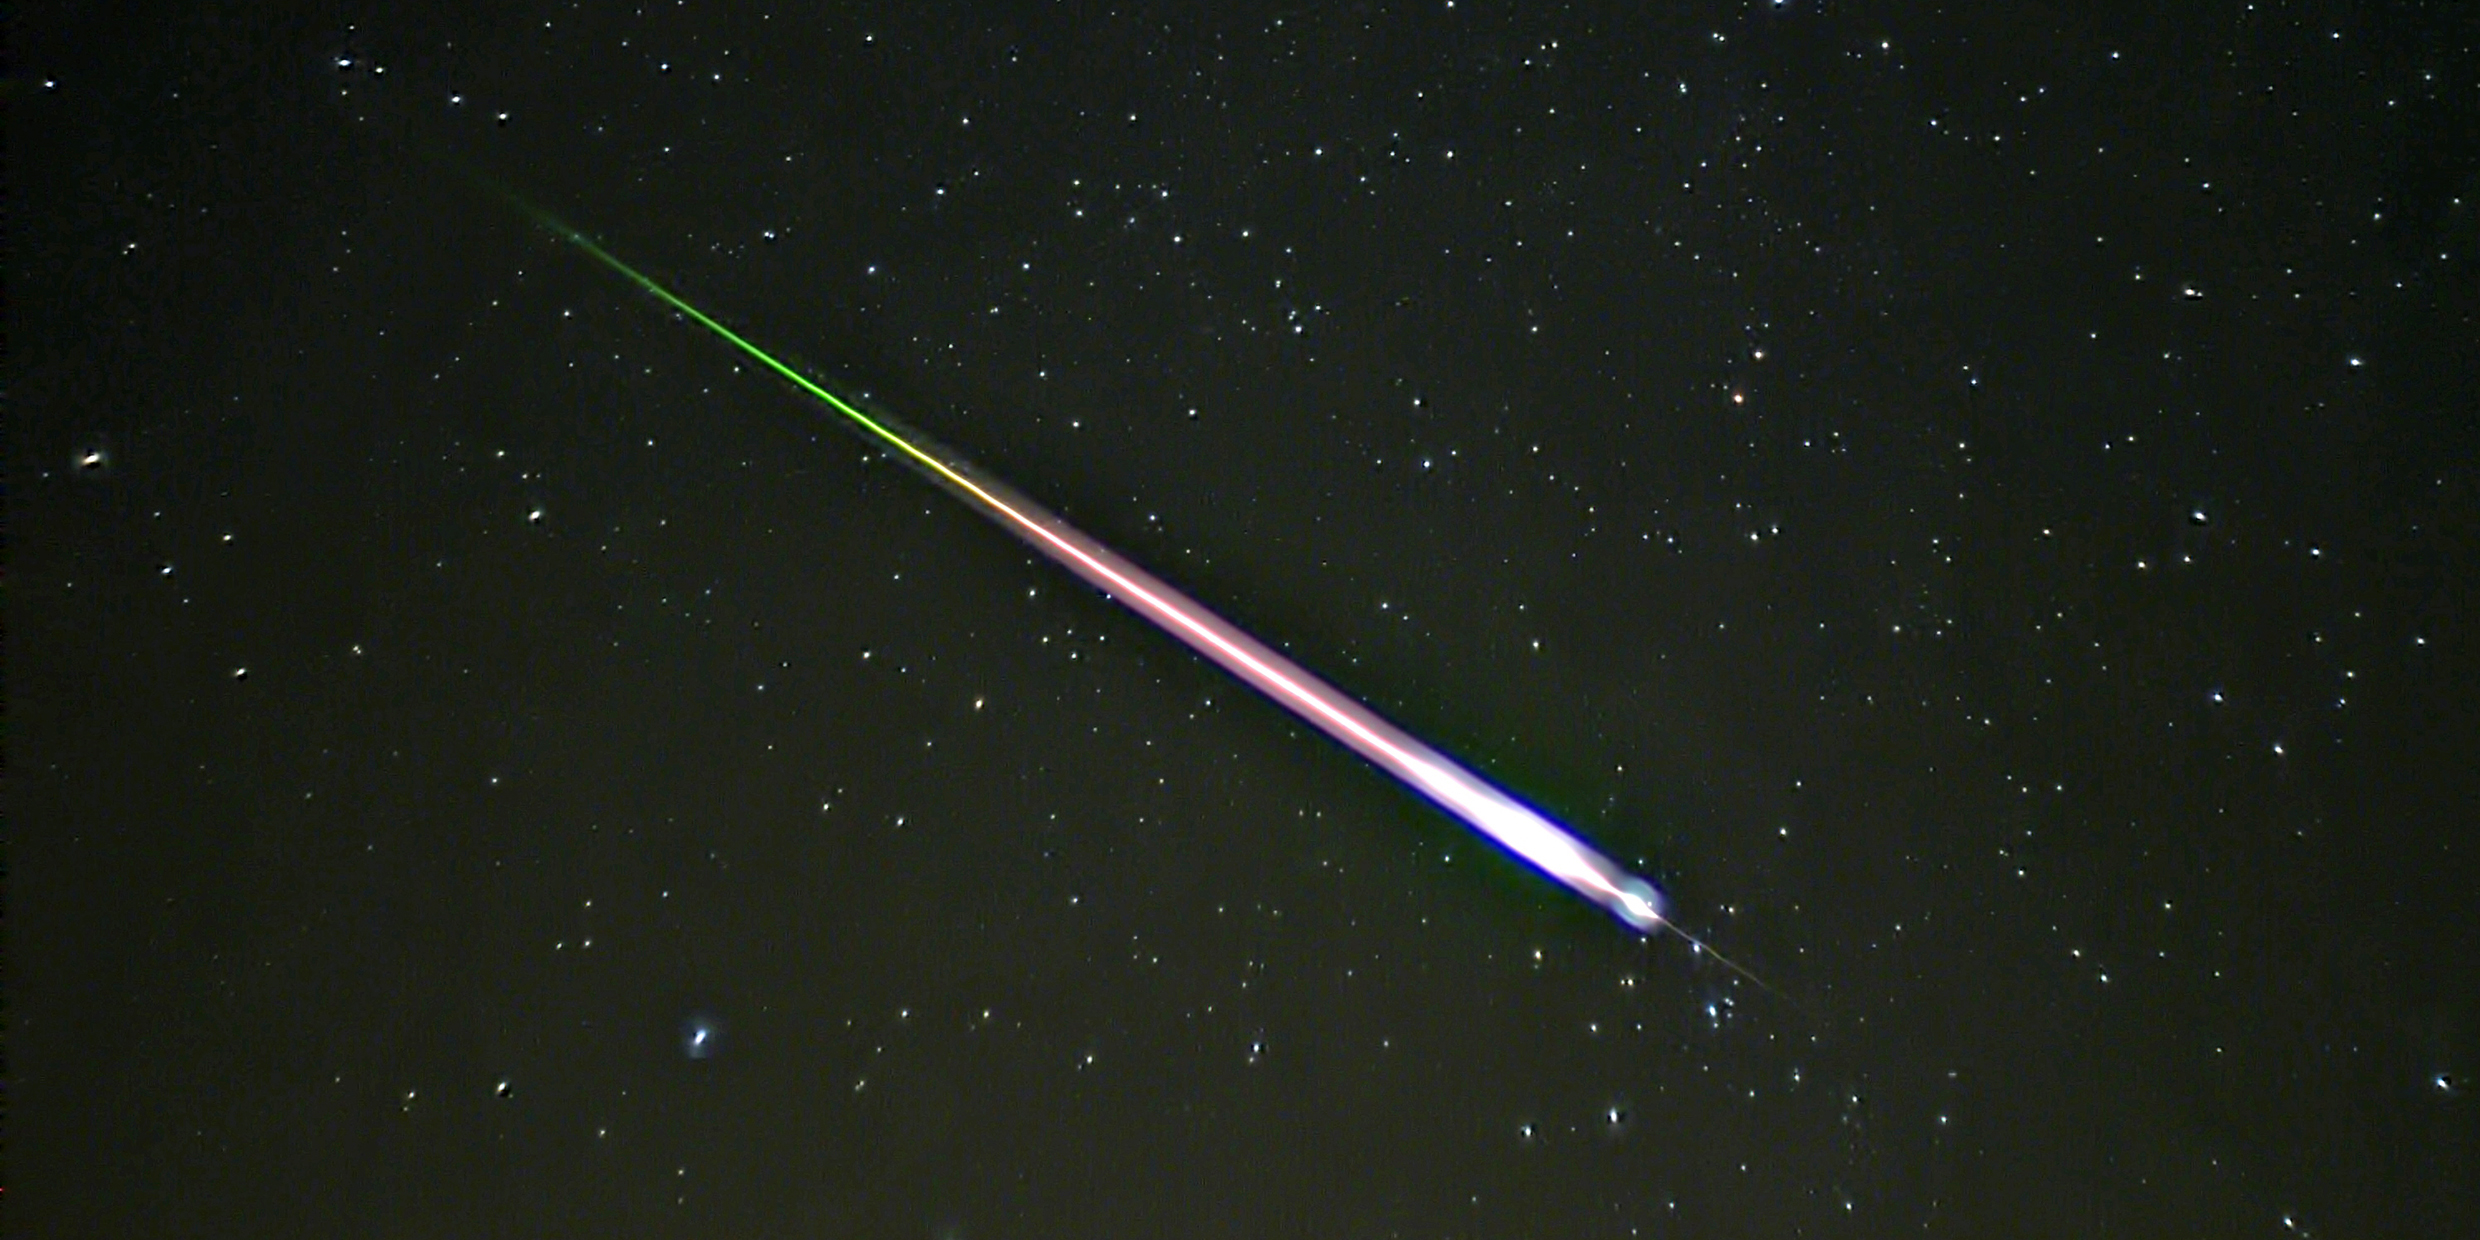 Image of a large meteor streaking through night sky